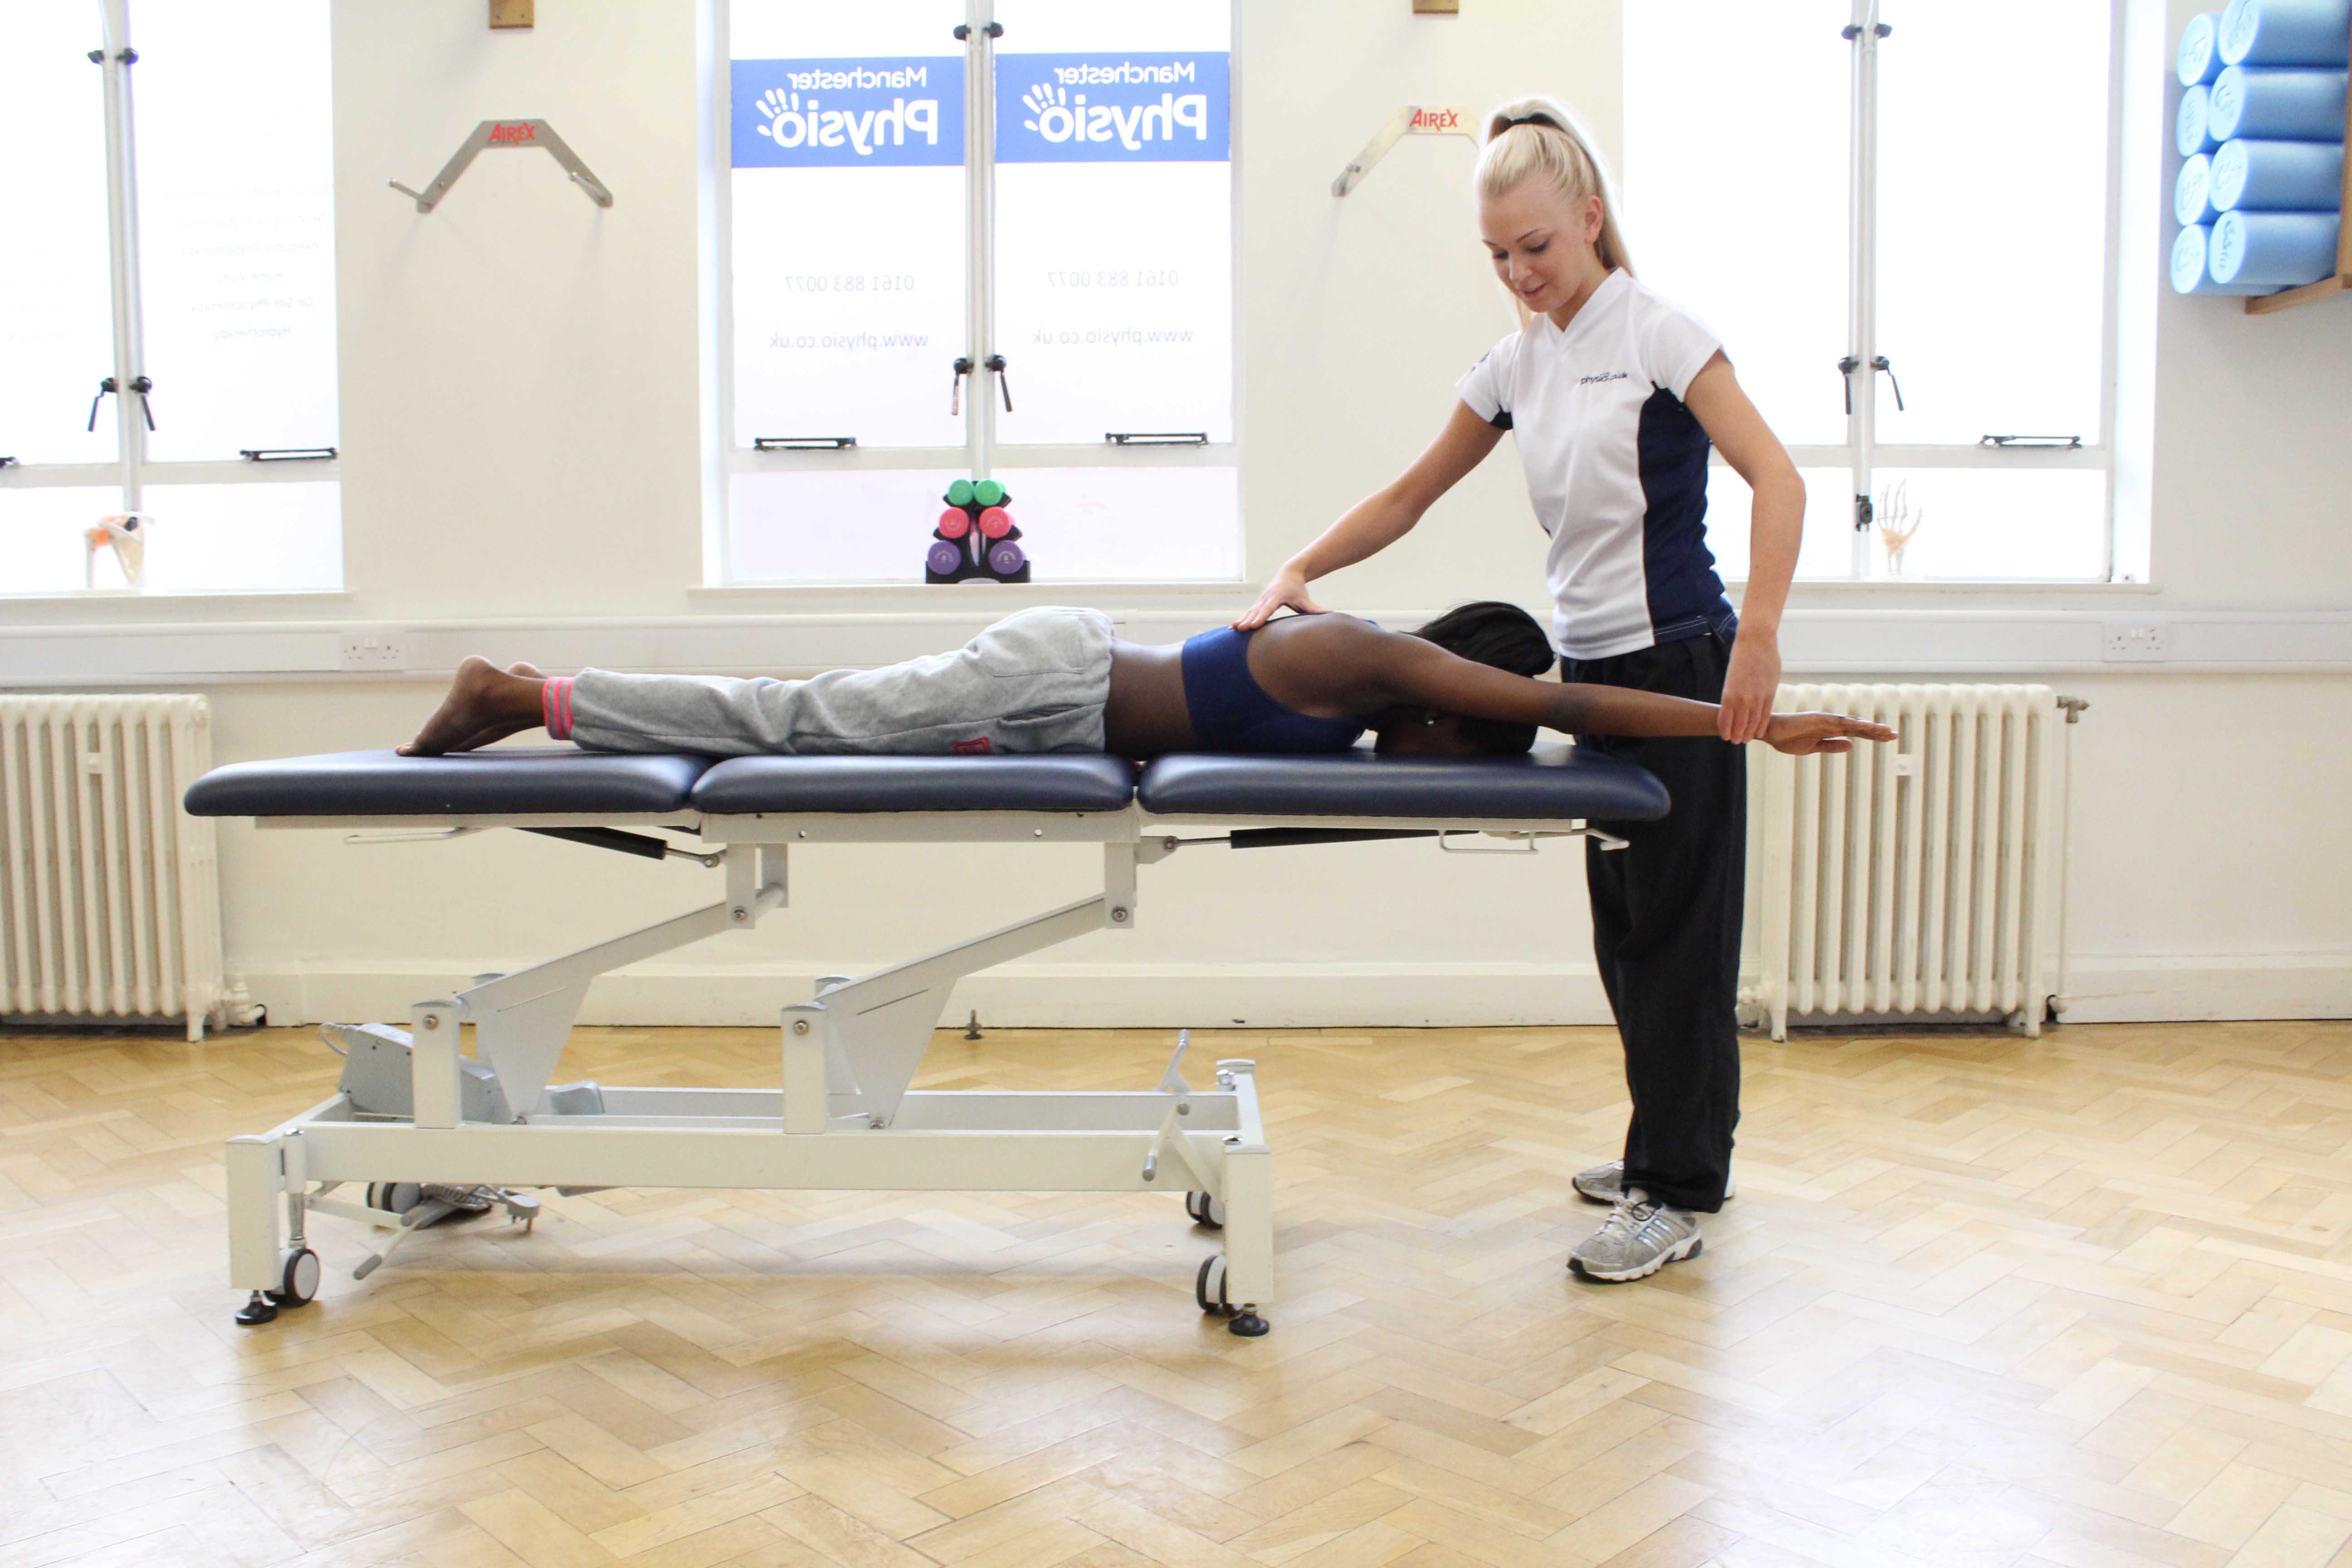 Physiotherapy following surgery will help achieve the best possible recovery, avoiding complications from poor healing.